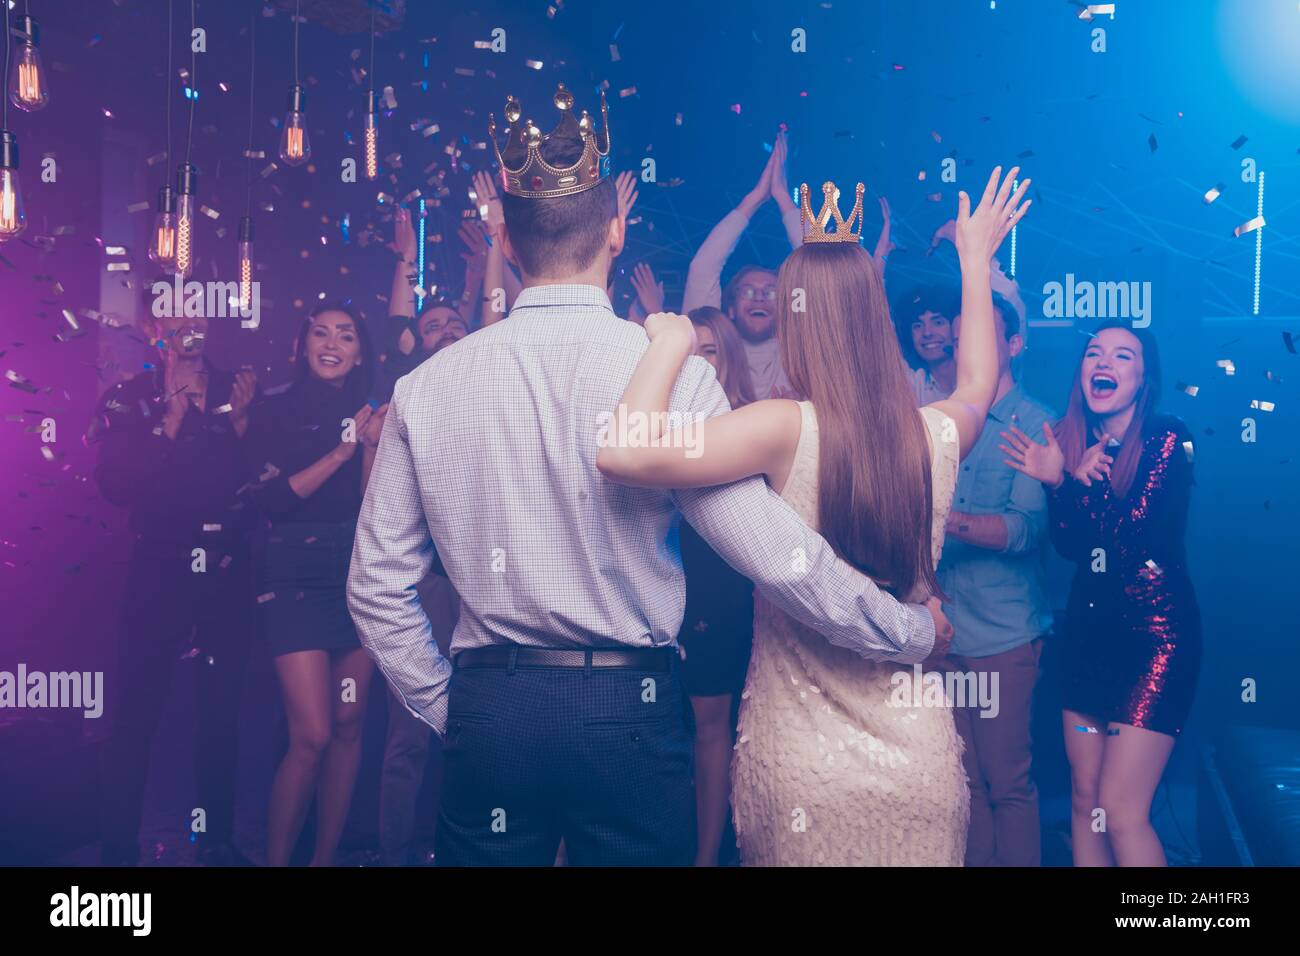 Back side view portrait of lovers have become king queen celebrating scream buddies enjoy dance floor Stock Photo